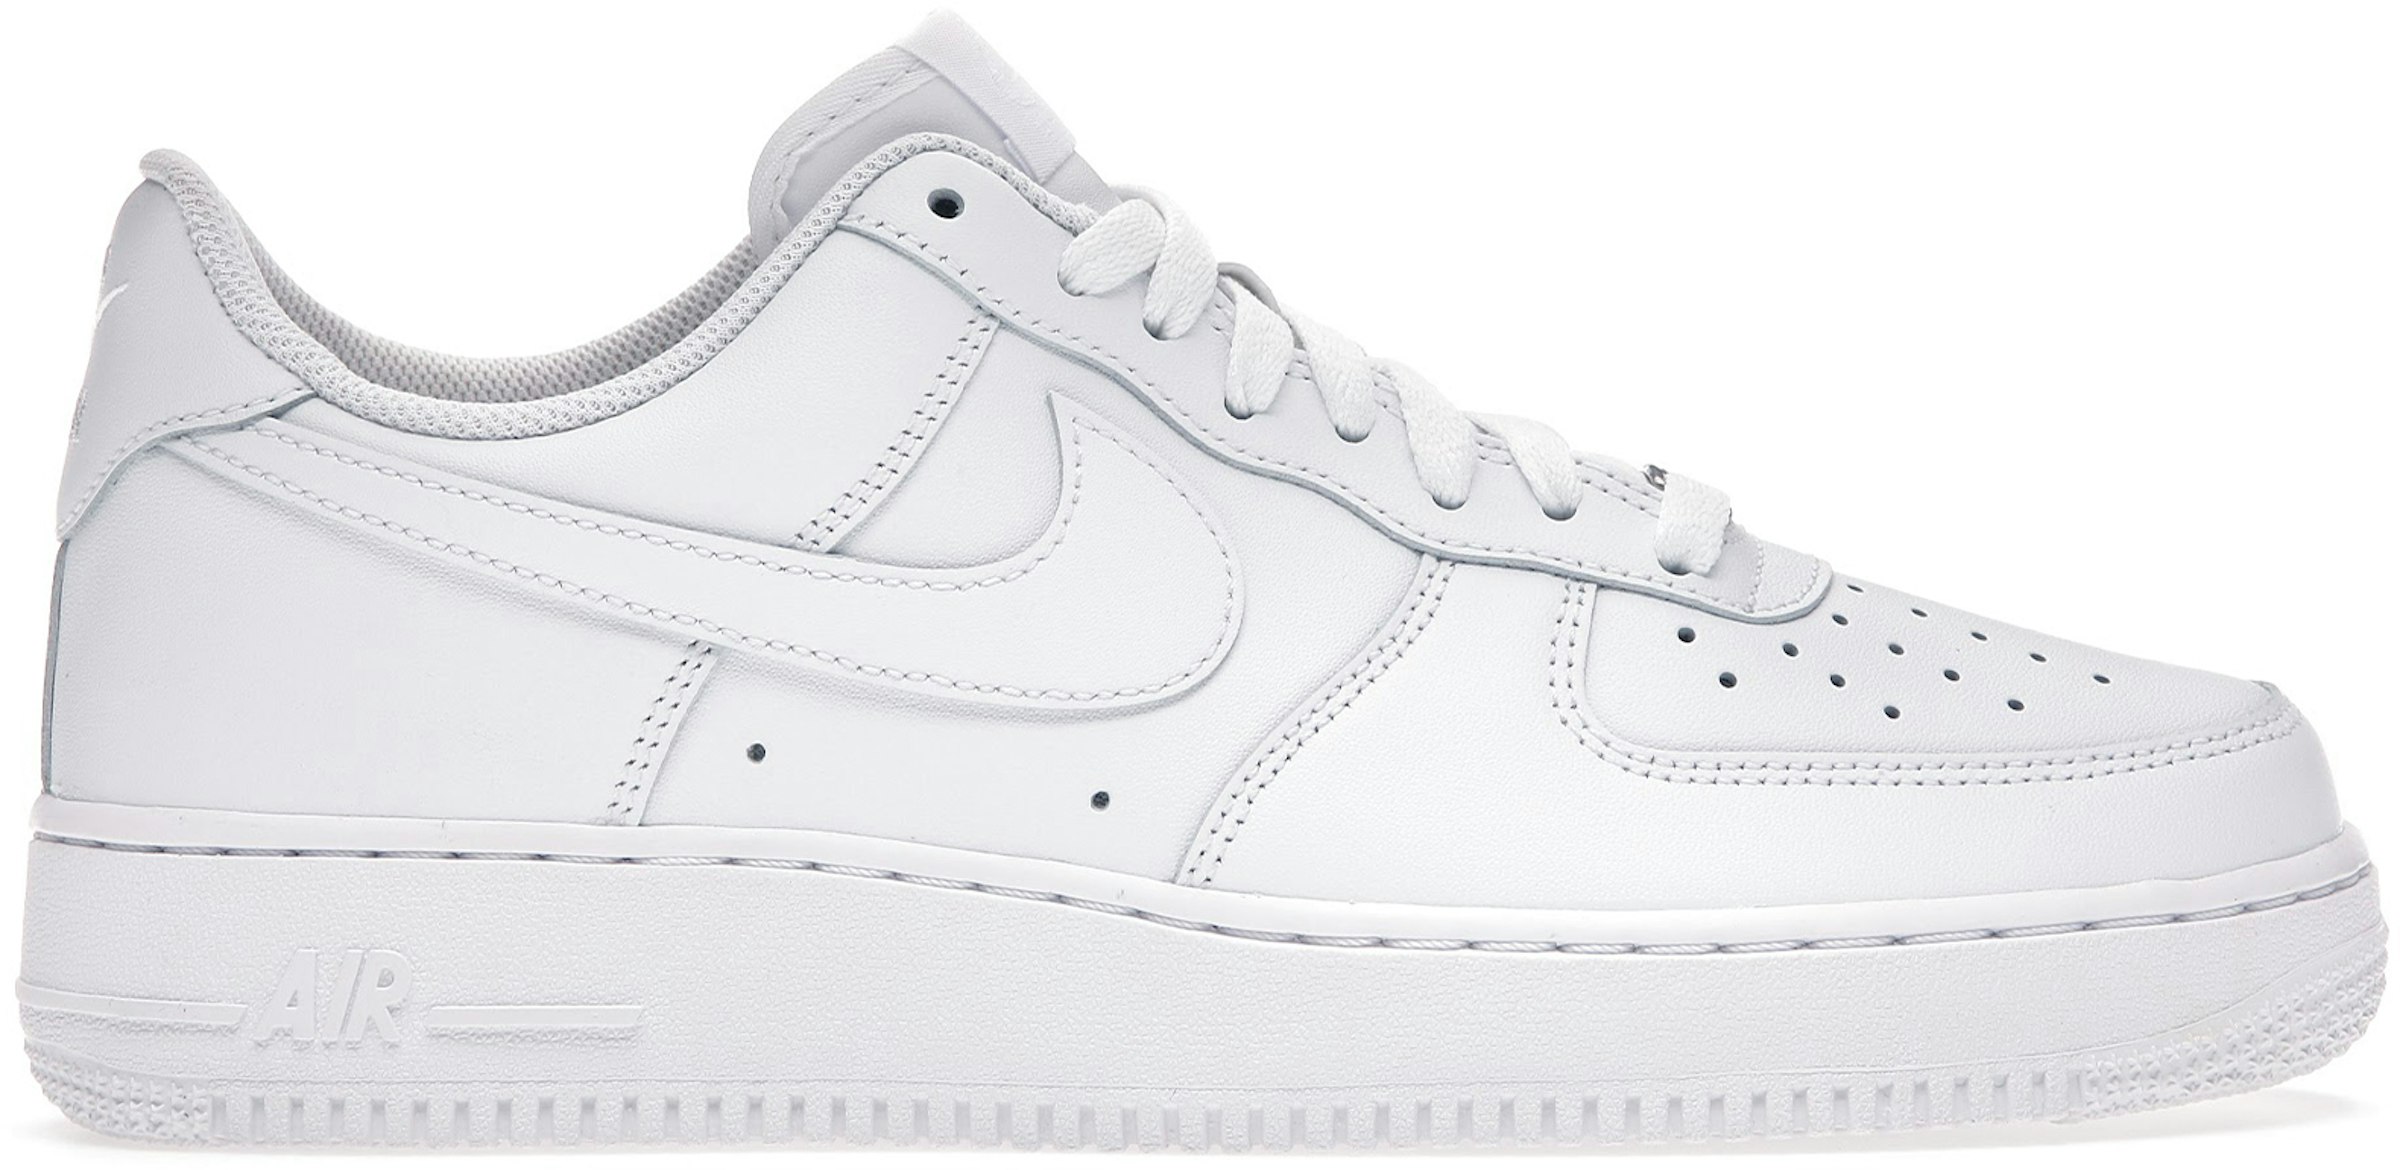 Nike Air Force 1 Low White 07 V2 Product ?fit=fill&bg=FFFFFF&w=1200&h=857&fm=jpg&auto=compress&dpr=2&trim=color&updated At=1631122839&q=75